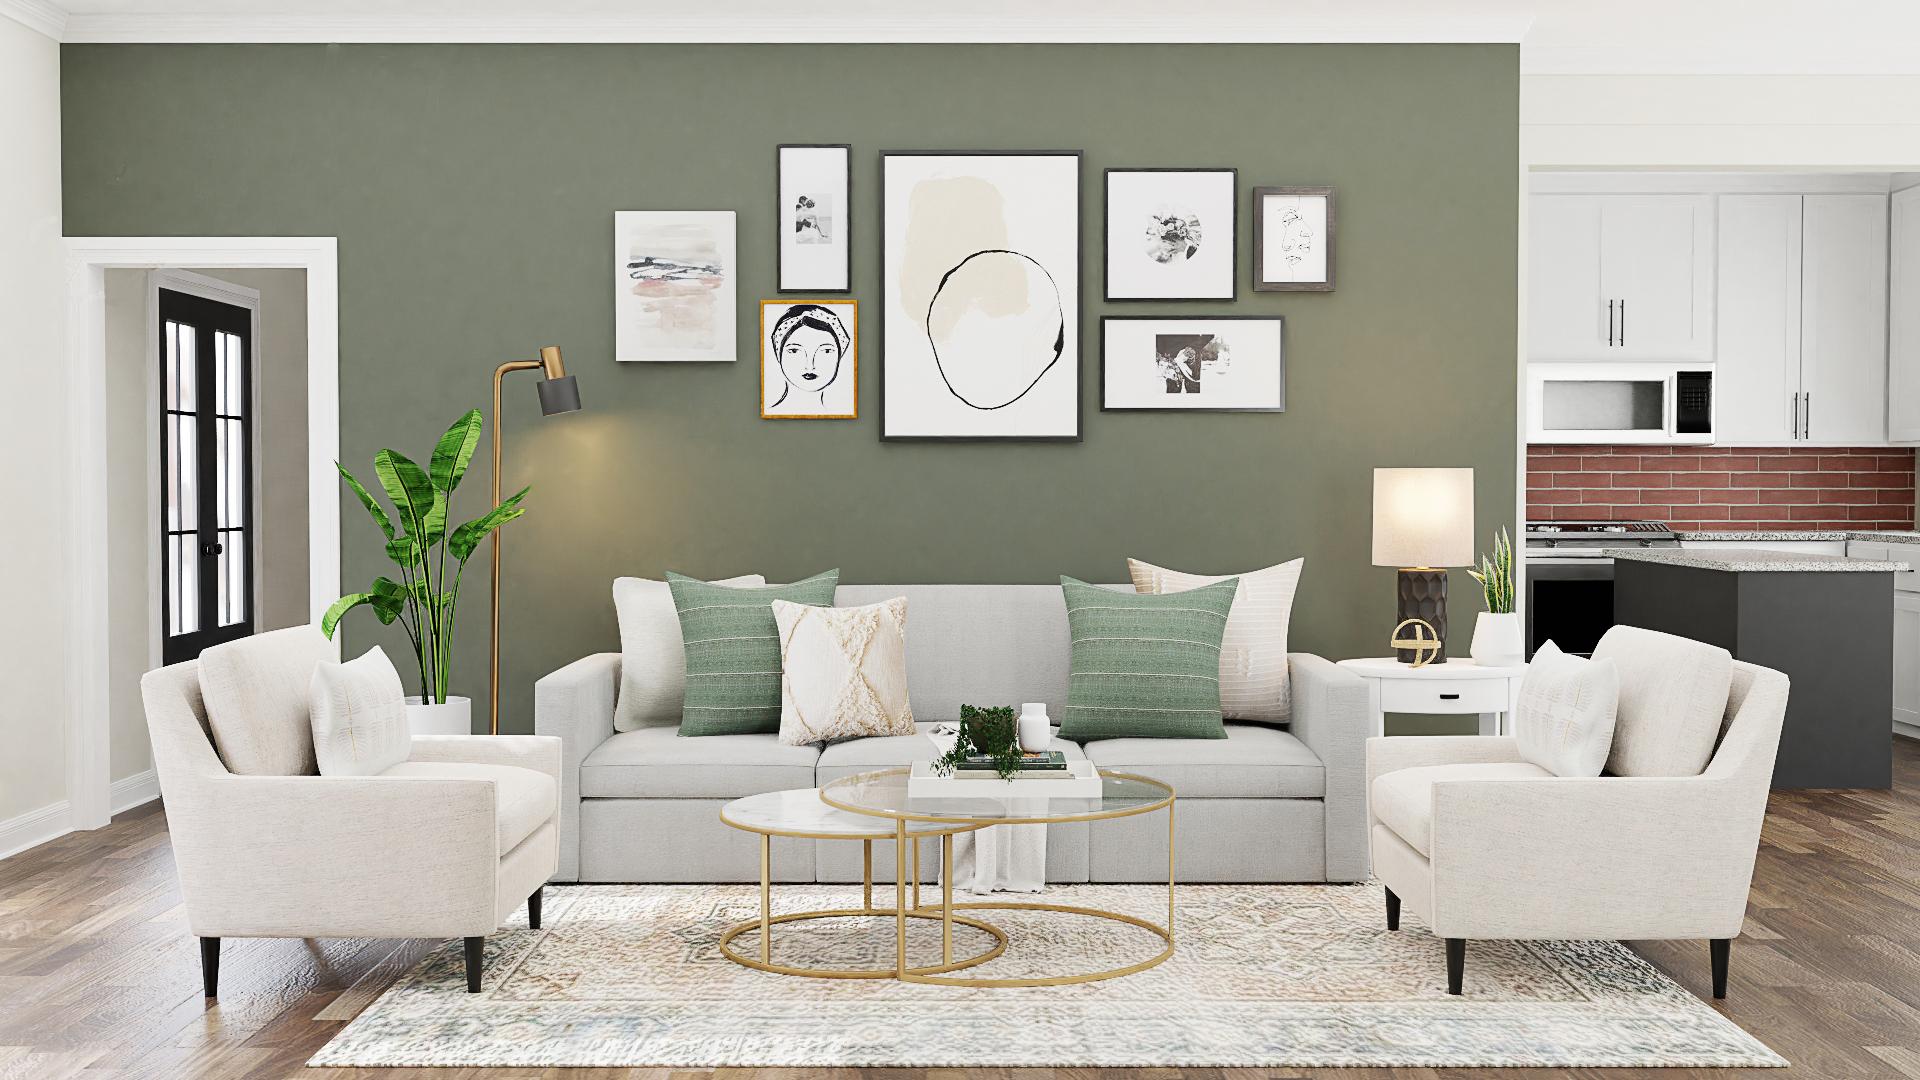 Best Popular Living Room Paint Colors Of 2020 You Should Know